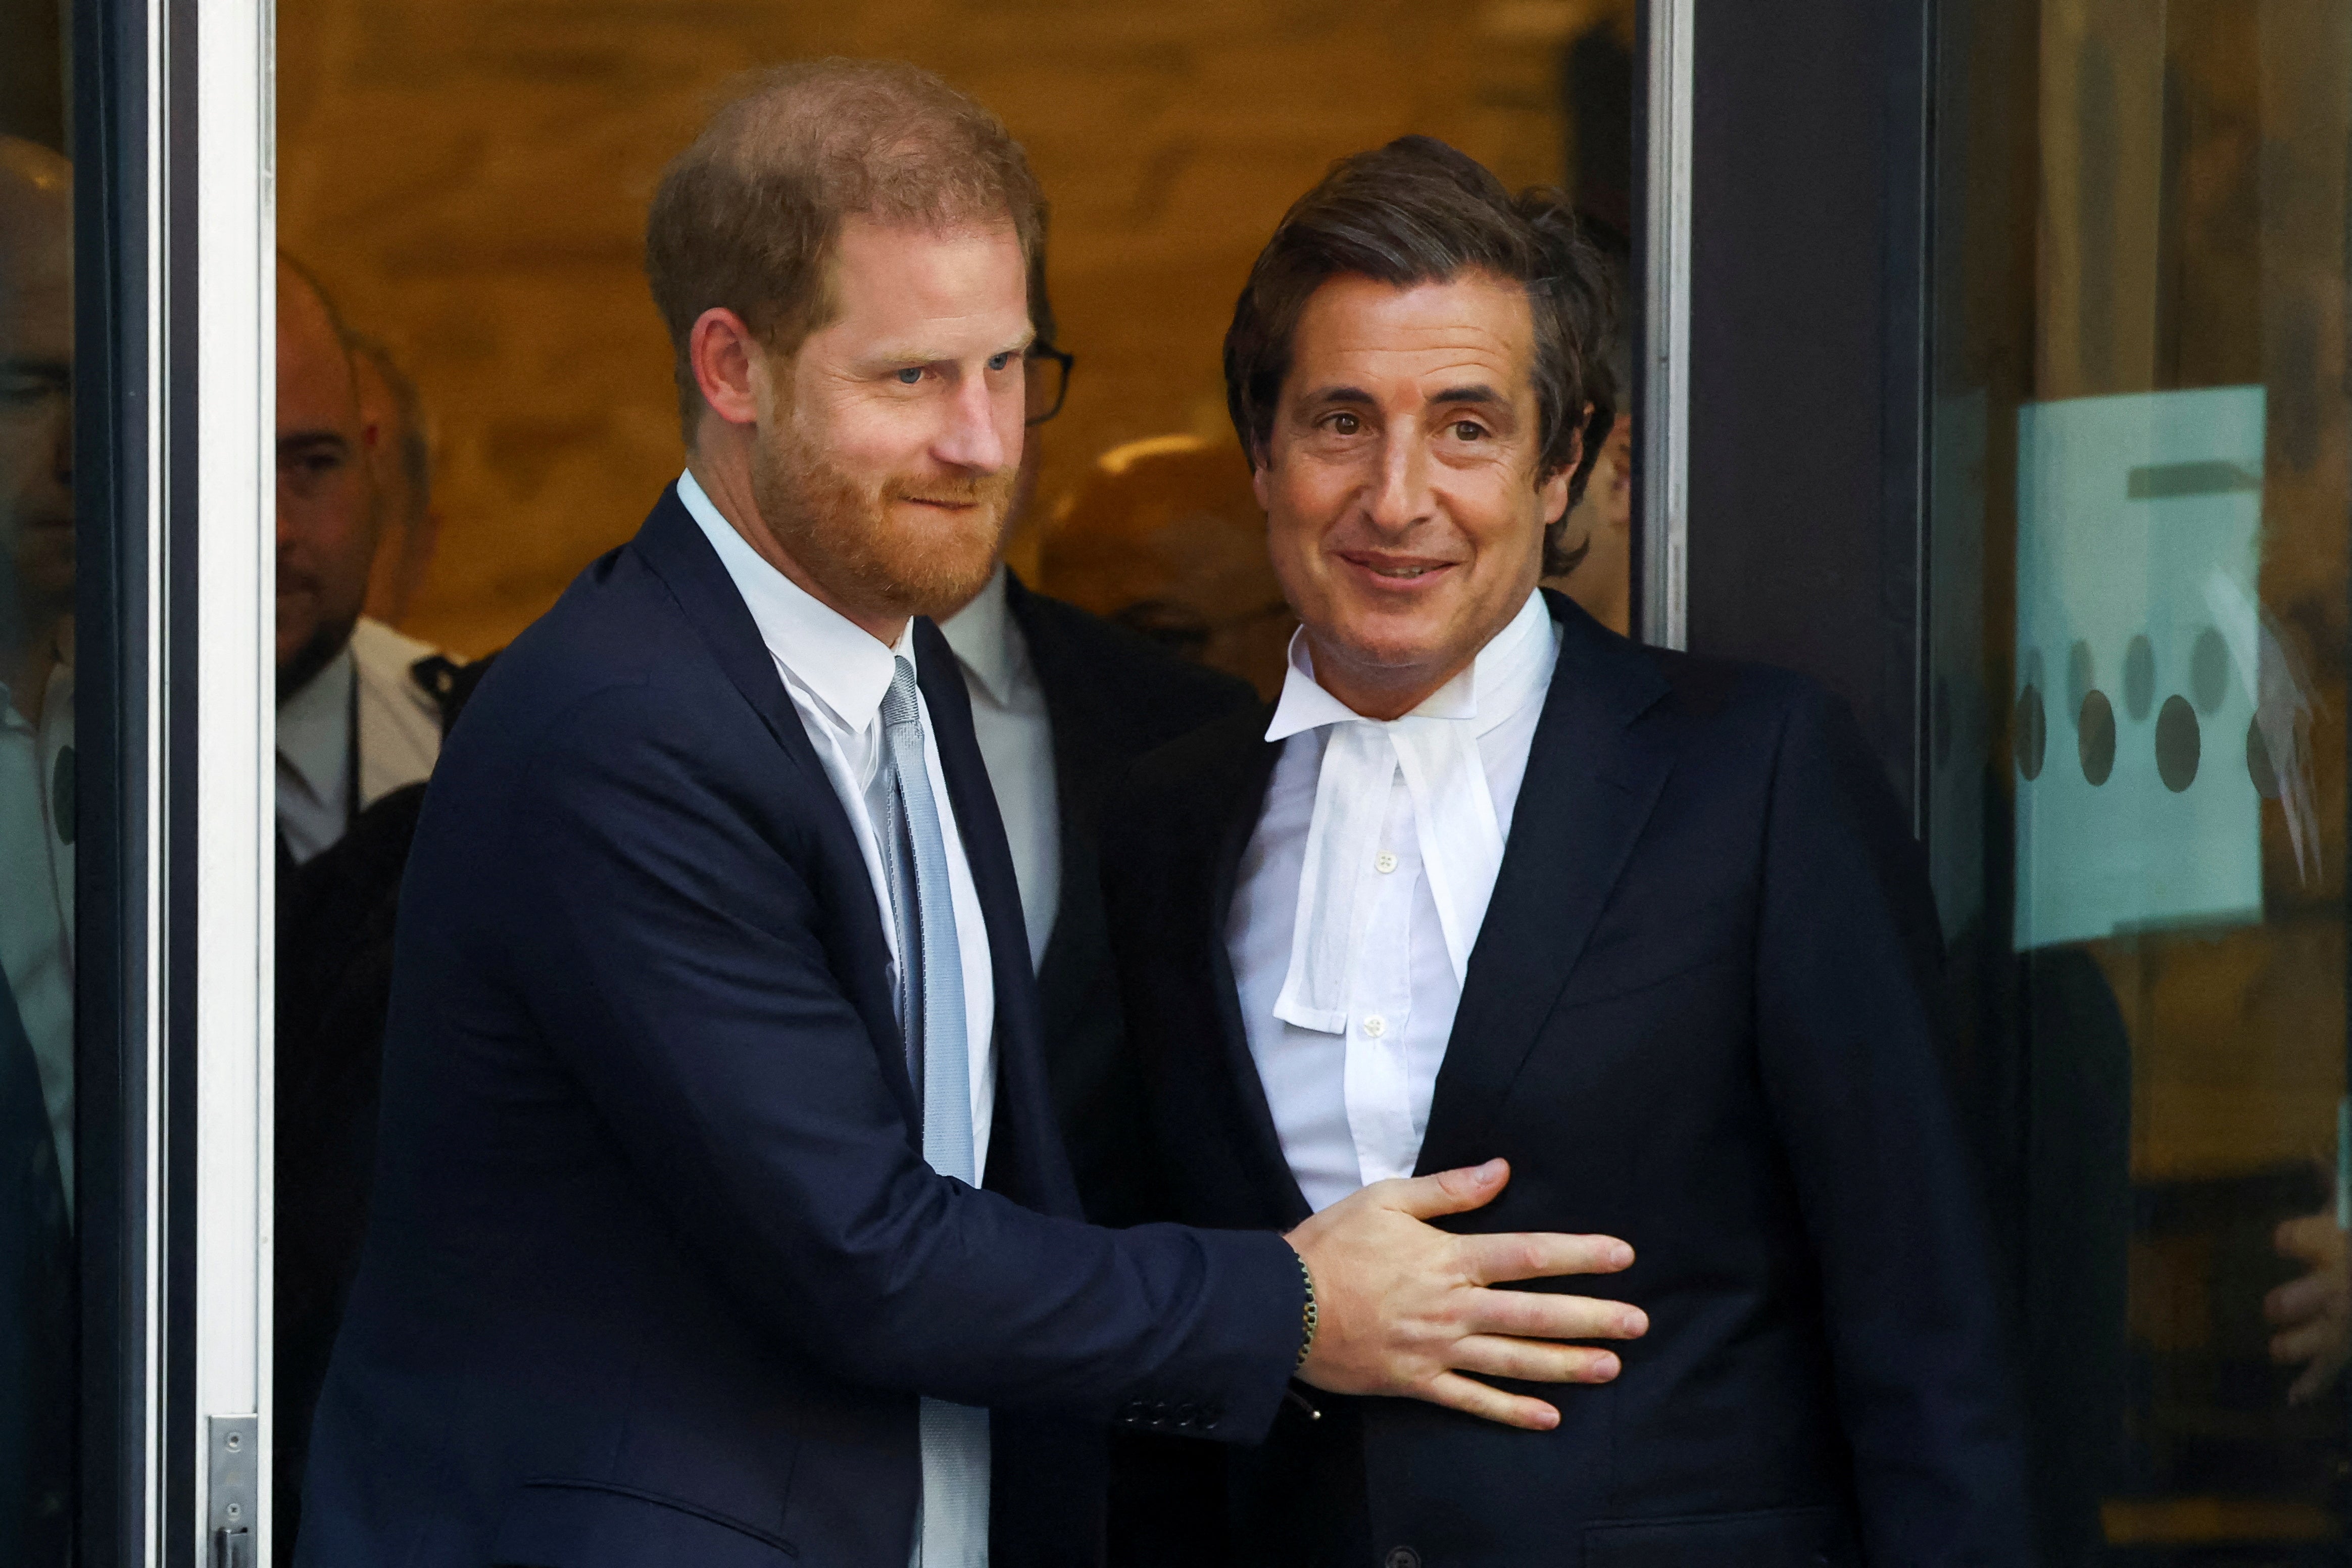 The Duke of Sussex with his lawyer David Sherborne